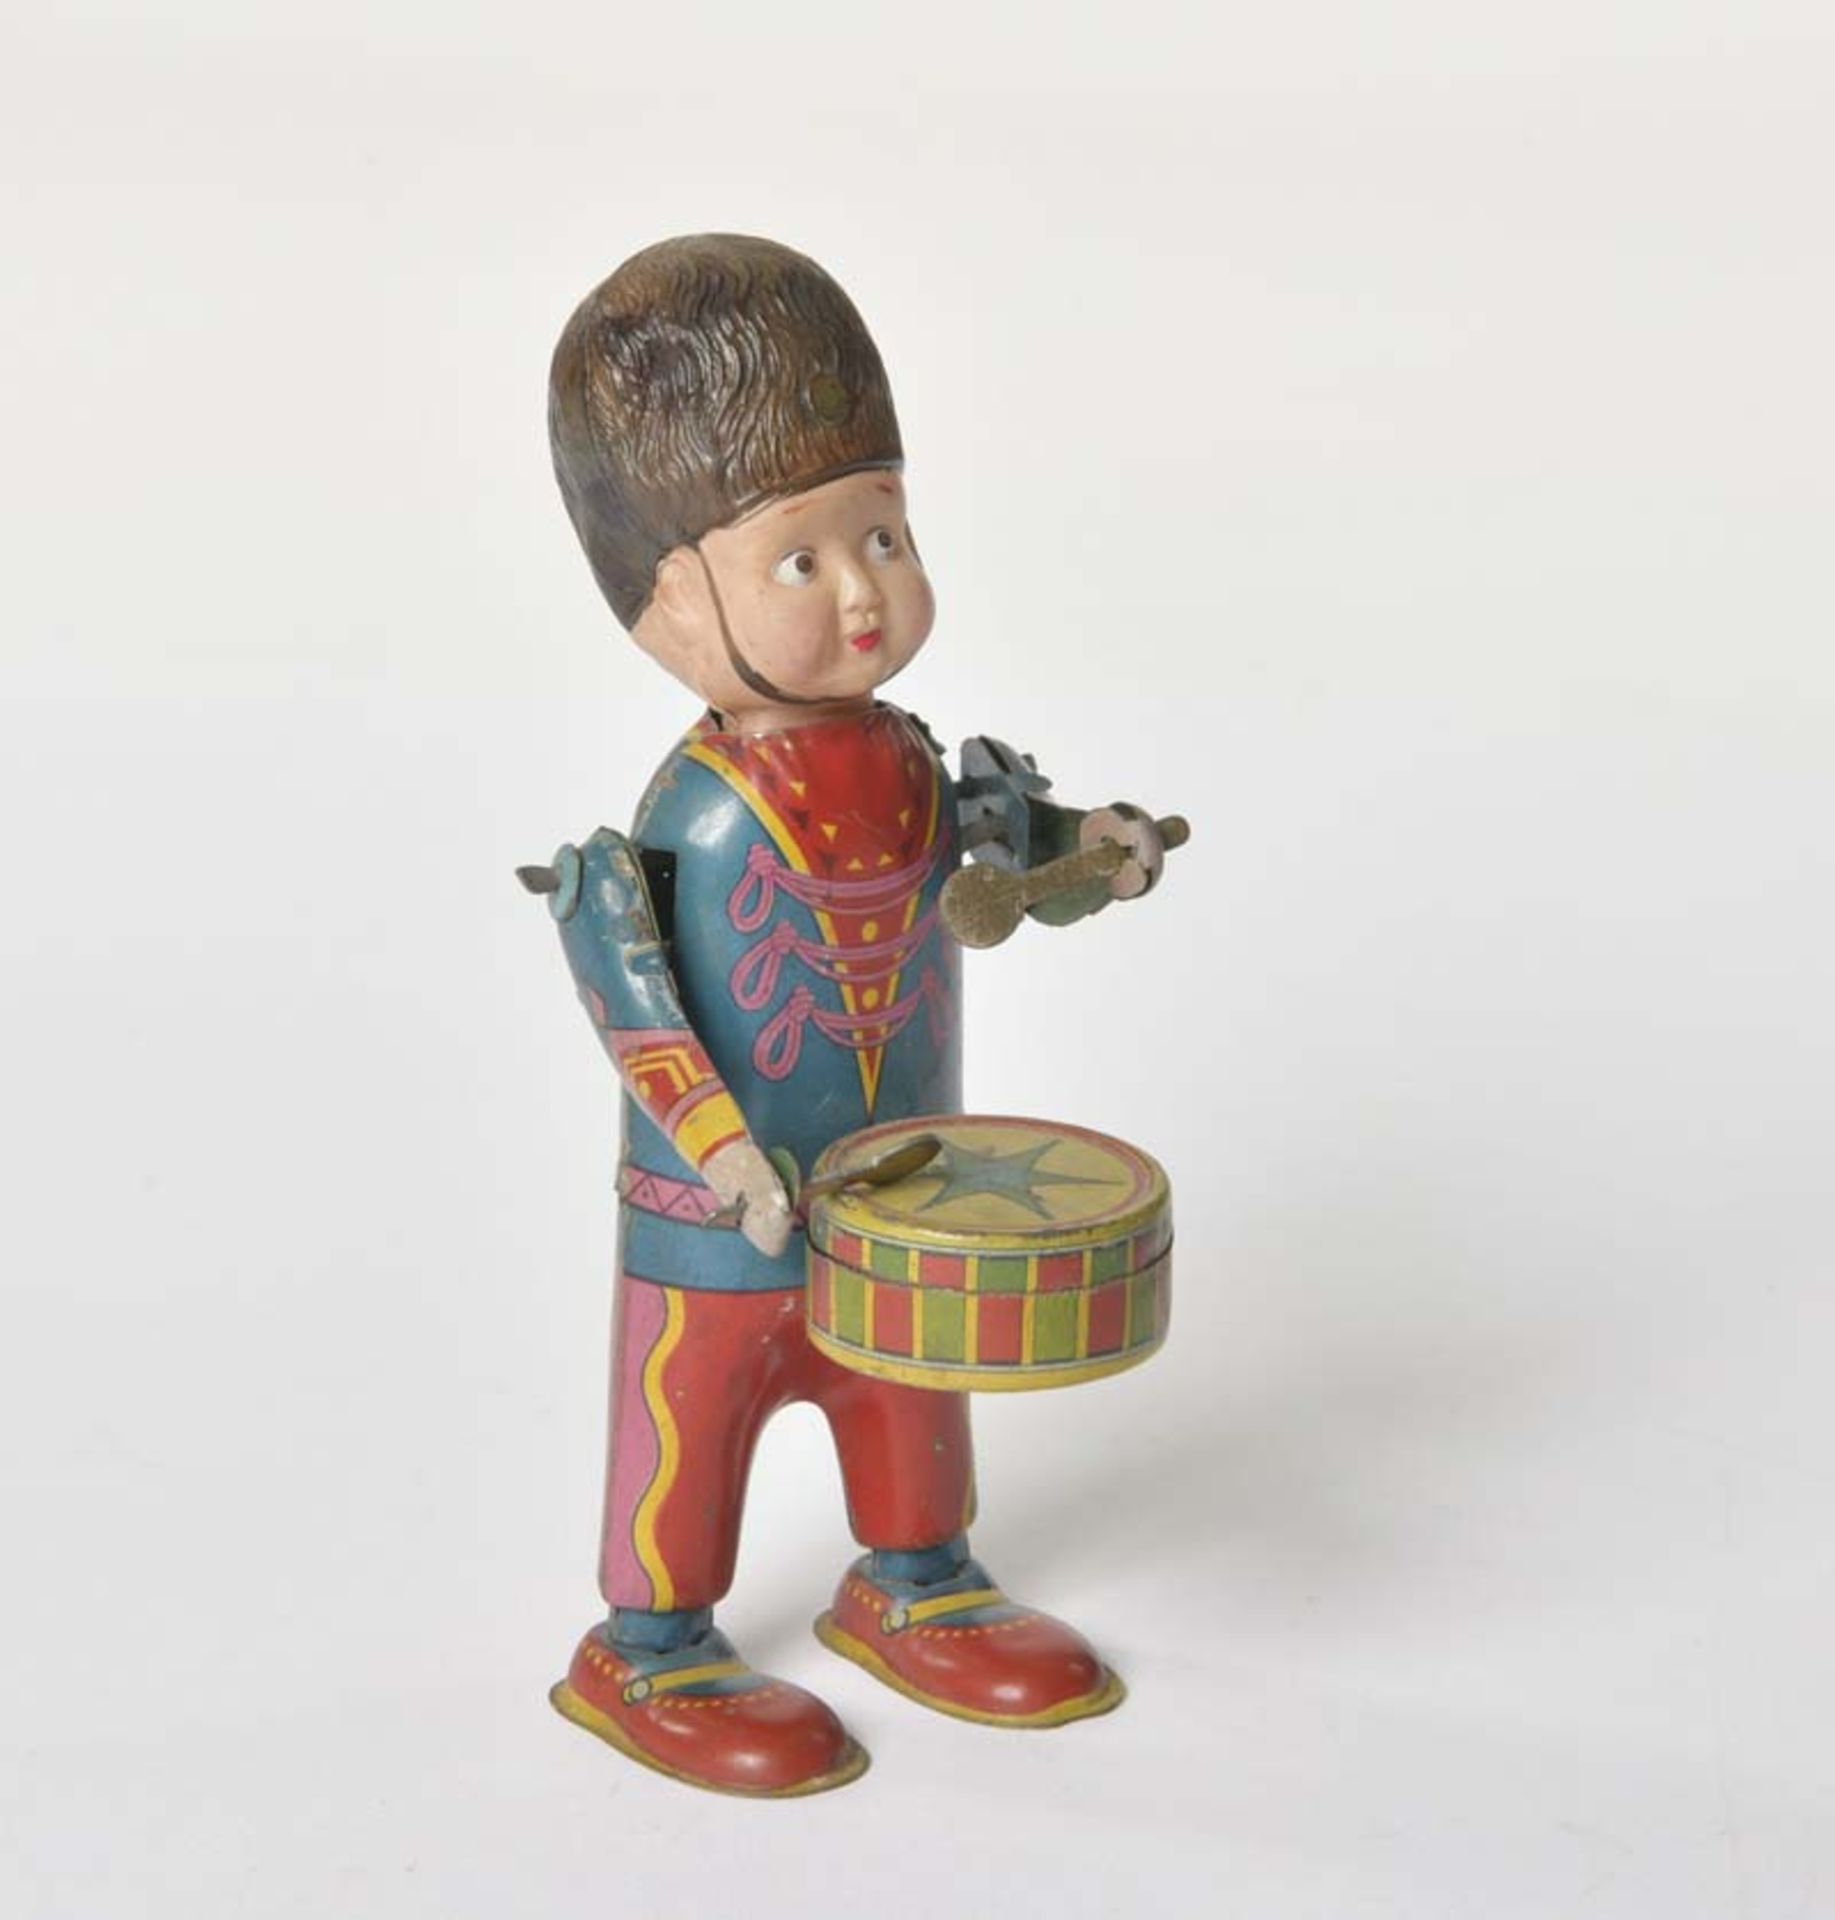 Drumming Boy, Japan, tin, head out of celluloide, cw ok, min. paint d., head min. dented, C 2+